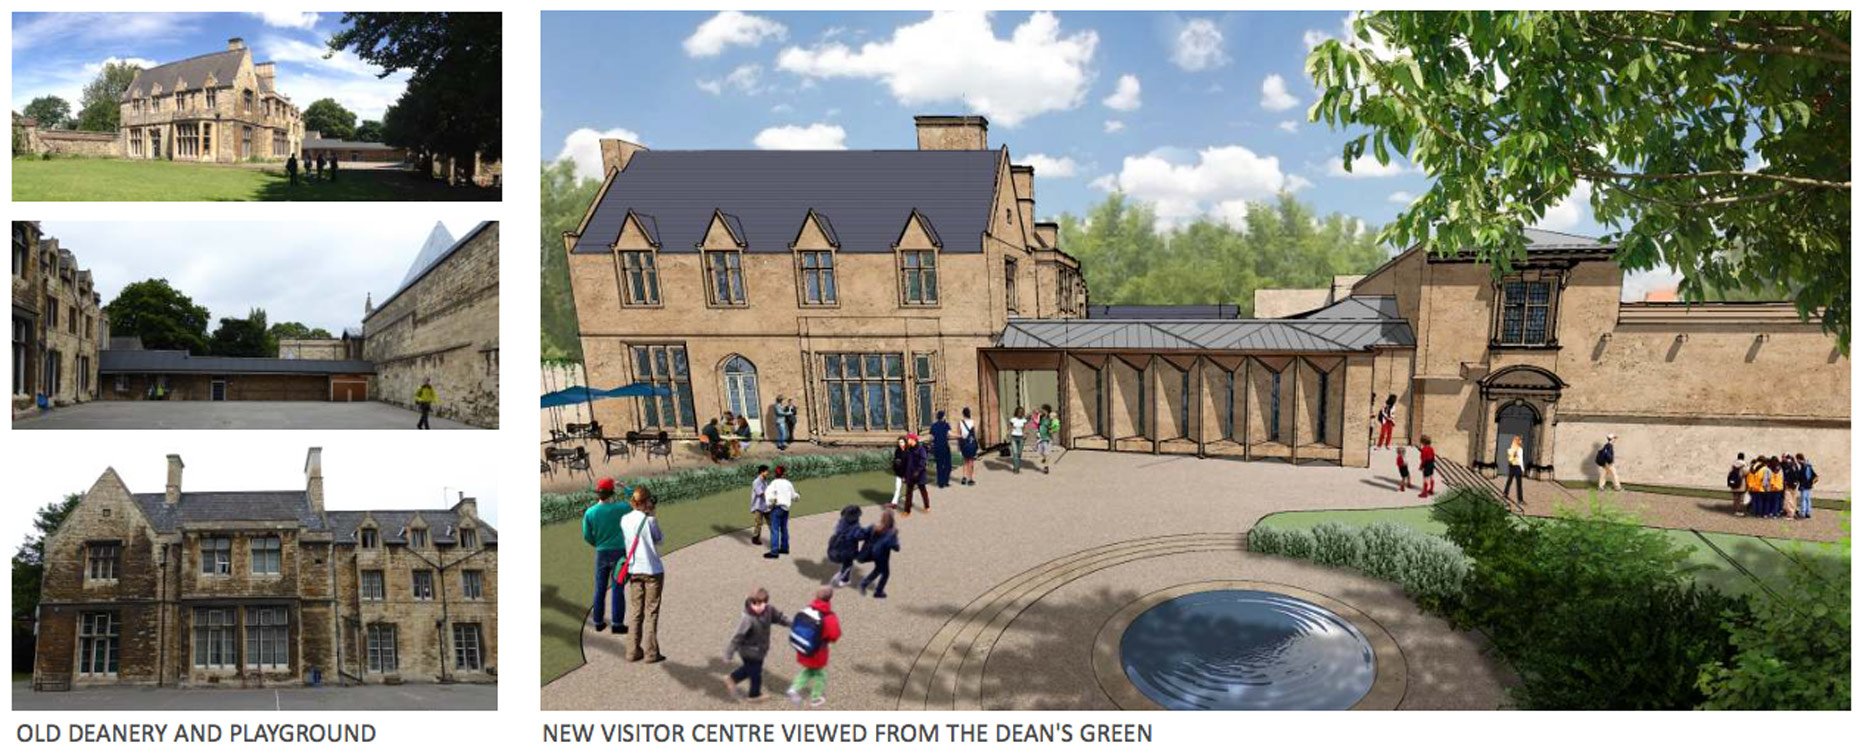 The Deanery will be transformed into a learning centre as part of the plans. 